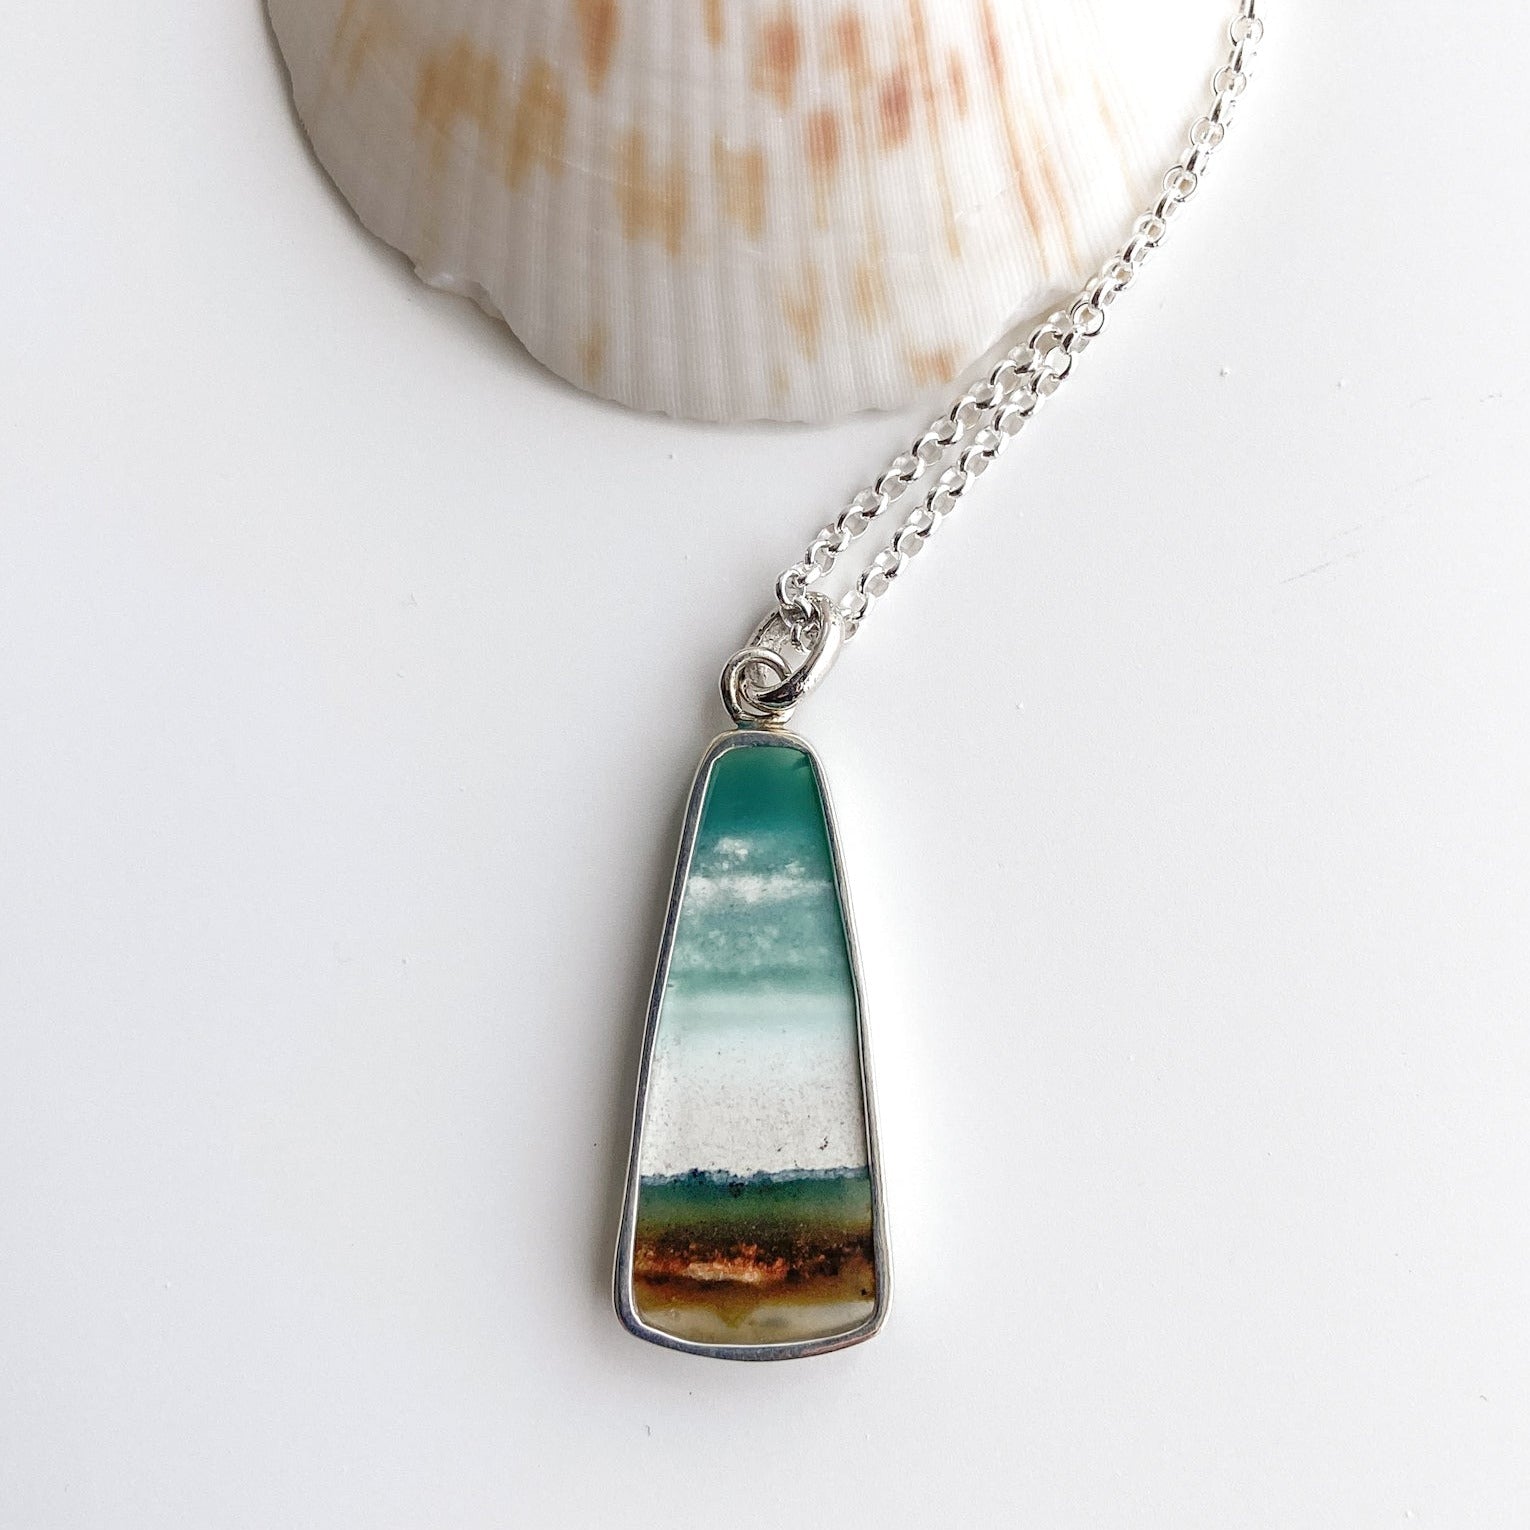 The backside of the opalized wood pendant is cut out to reveal the polished stone.